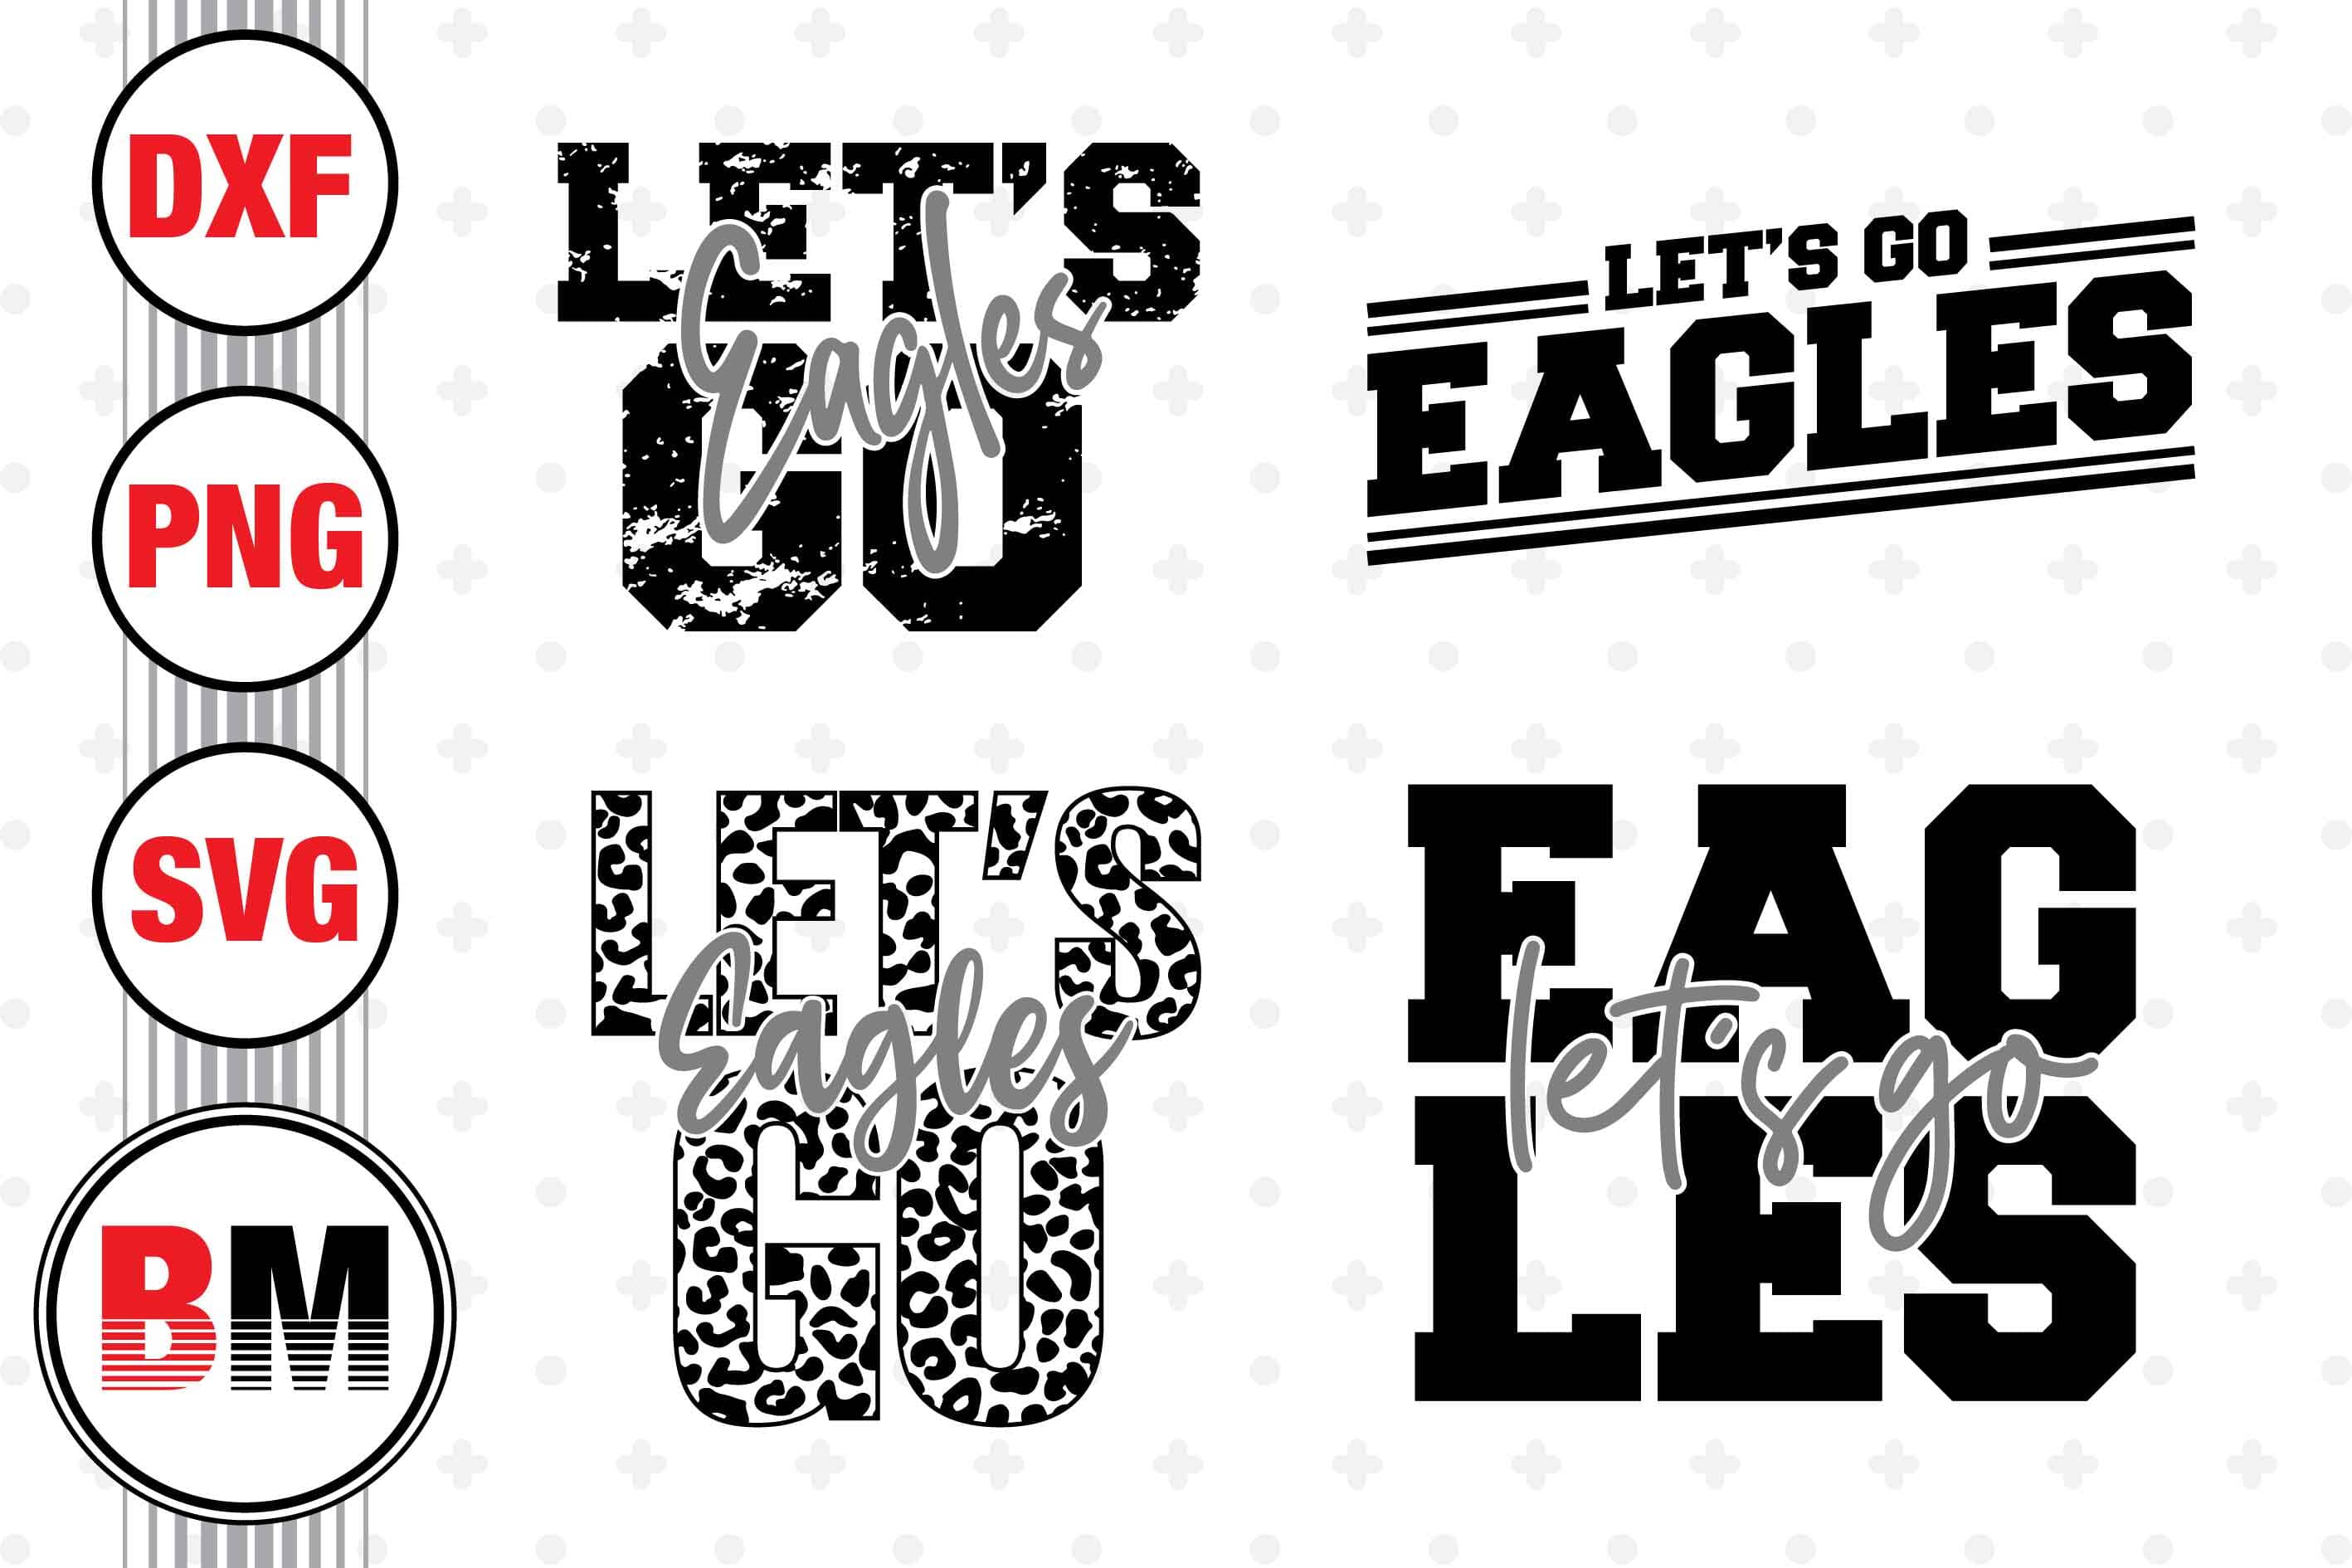 Let's Go Eagles Sports Team Mascot SVG PNG DXF & EPS Cut Files By